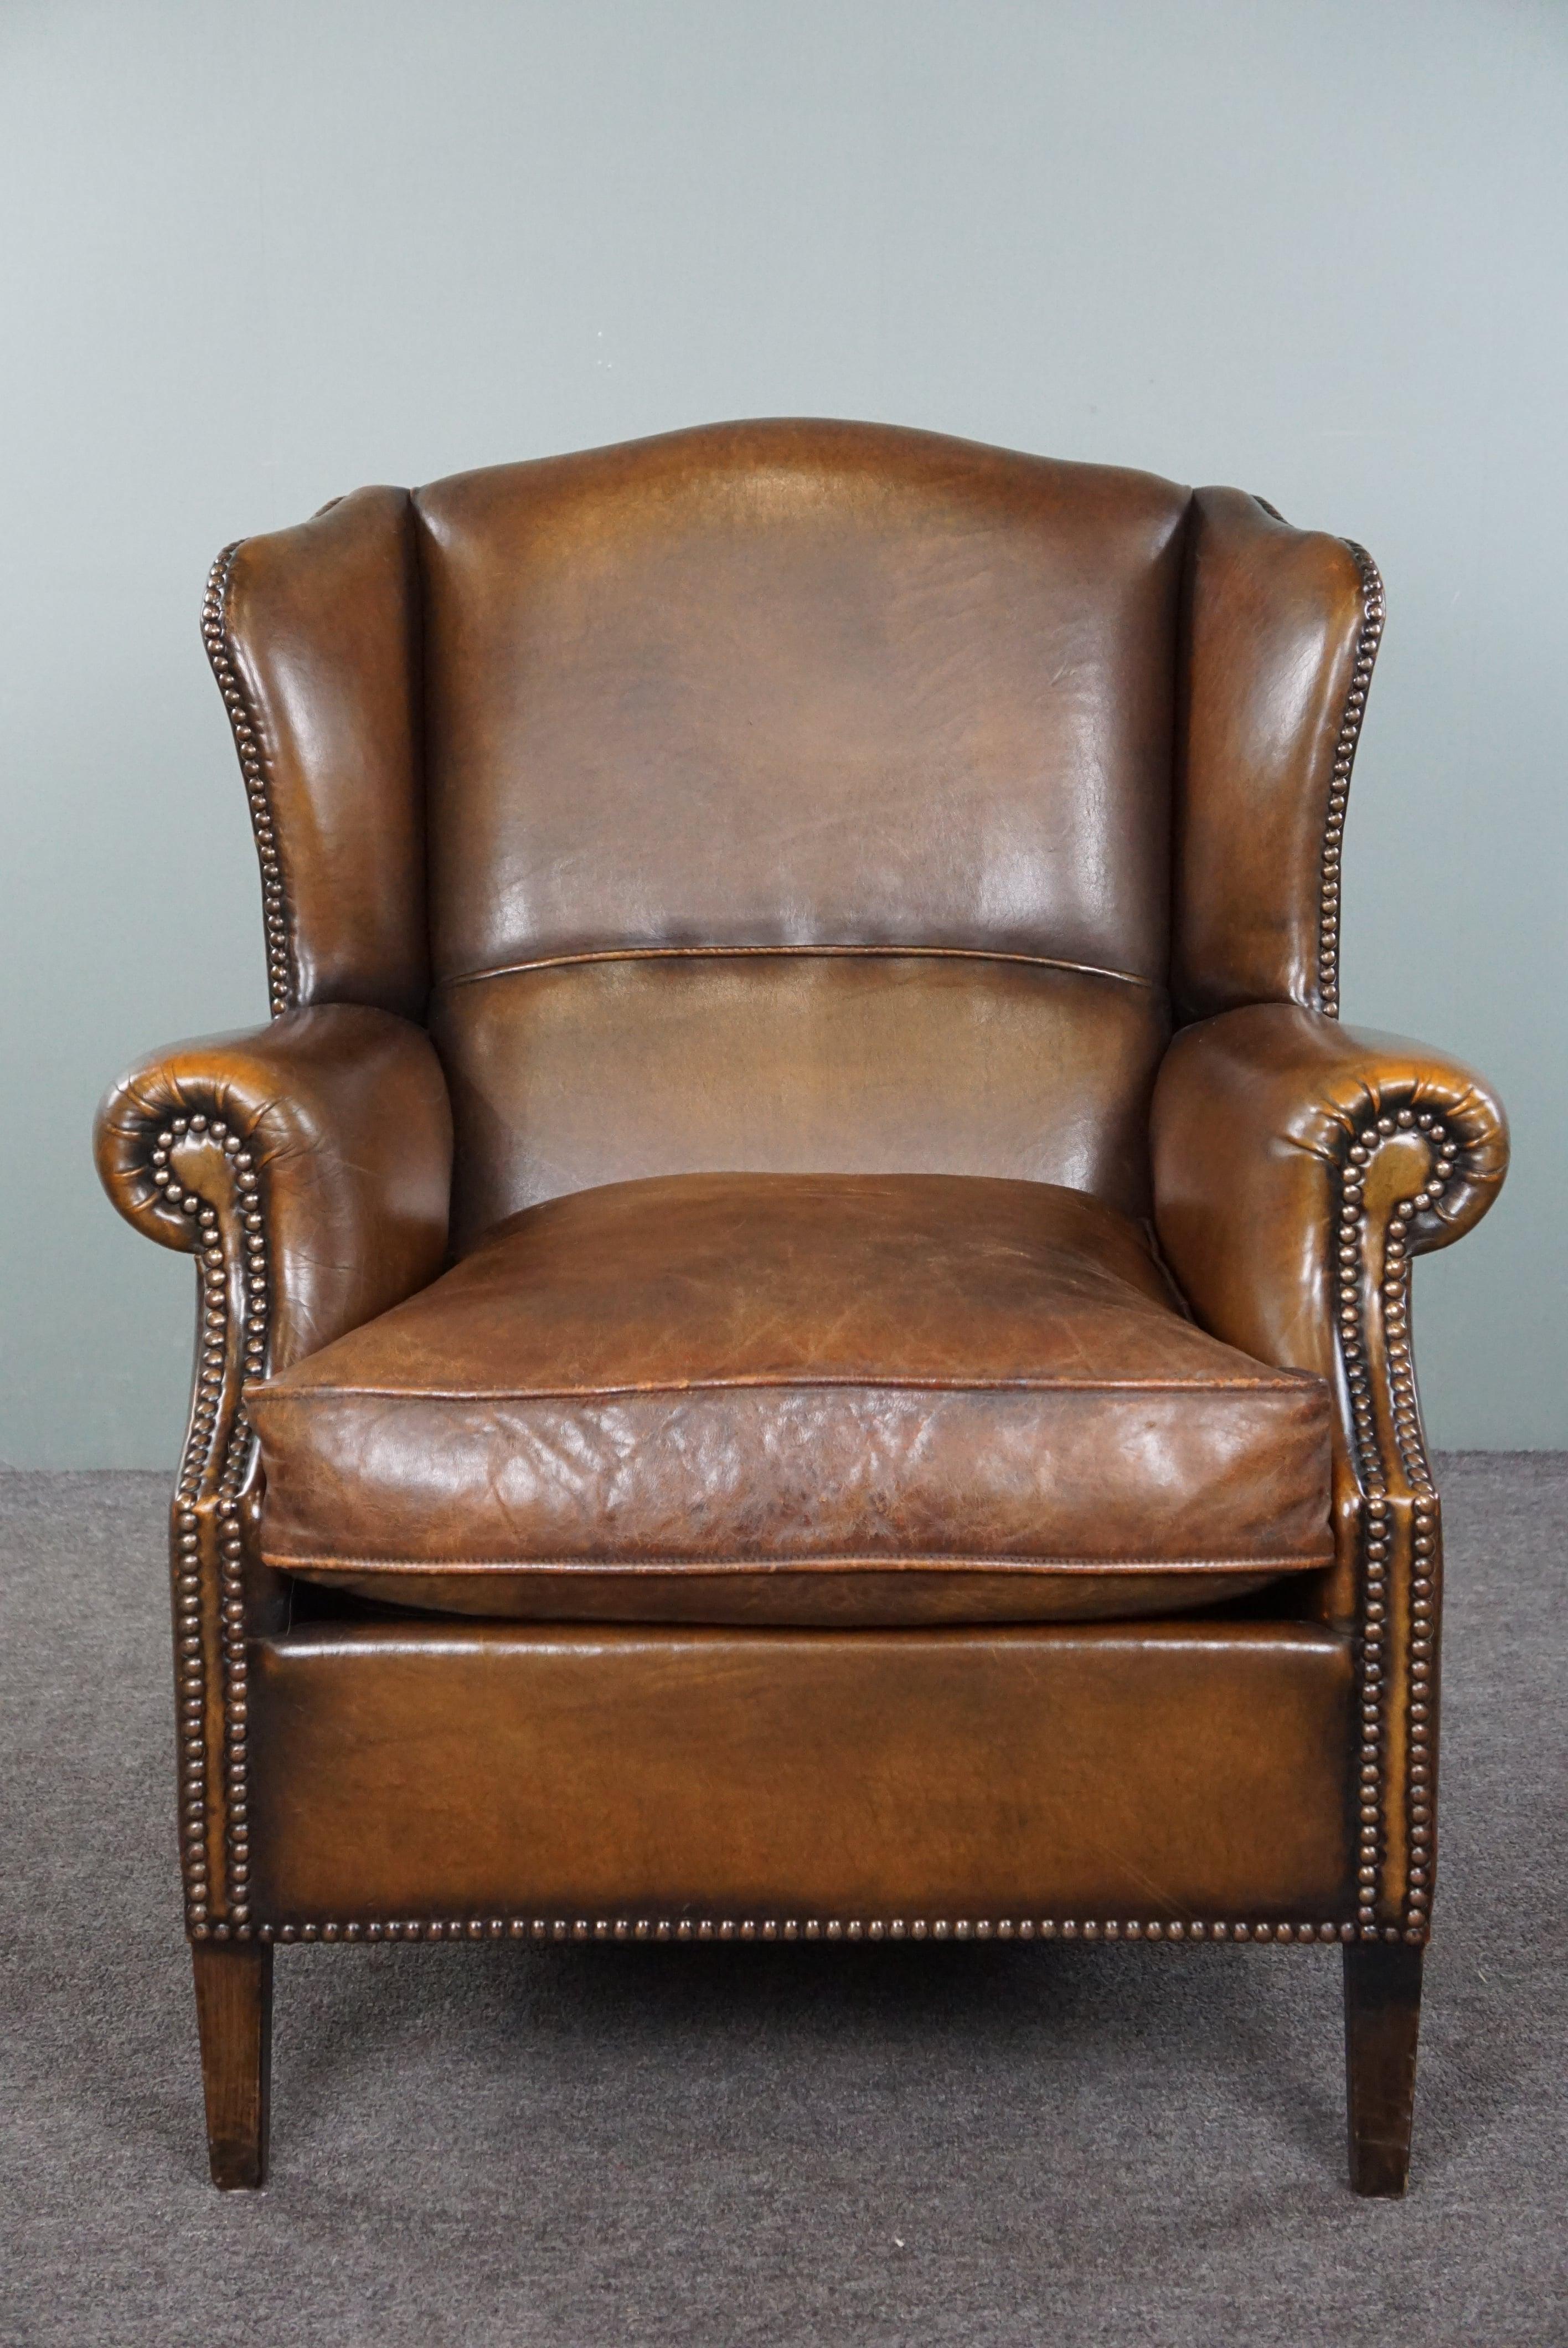 Offered is this beautiful wingback chair made of sheepskin, in good condition. A wingback chair in this gorgeous cognac color is something that many enthusiasts are passionate about. Of course, we understand why. These kinds of chairs are like true